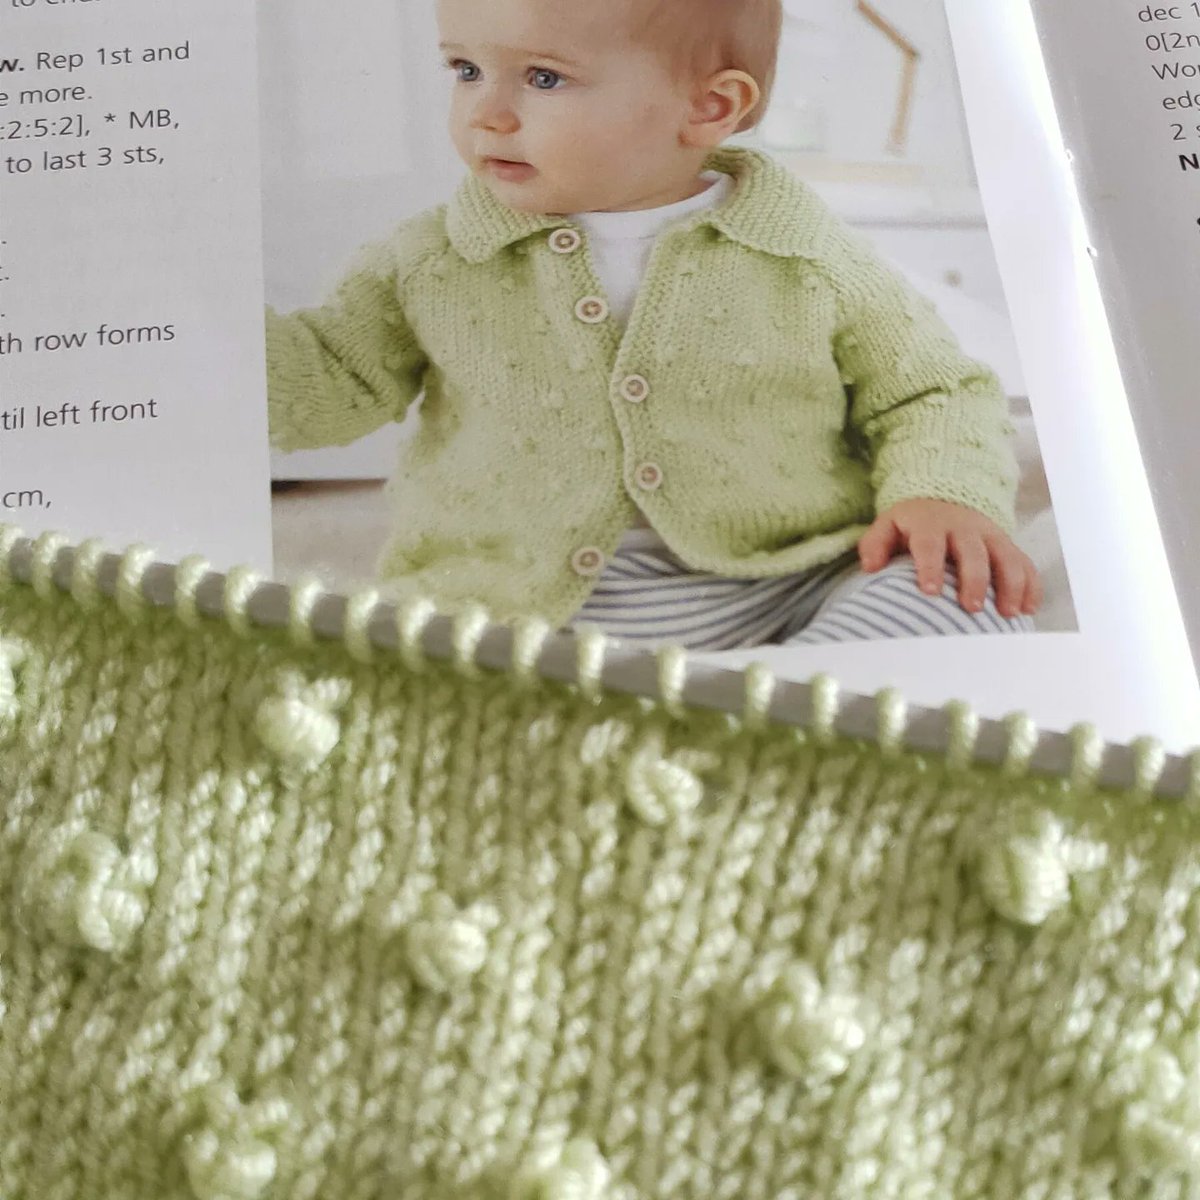 Knitting samples for the shop from the latest 'newborn book 3'. #kingcole using cherished baby yarn. This is 'little spottie cardi'. Love this avocado colour. #localyarnshop #localbusiness #shoppinglocal
#hellohorwich #shoppinginhorwich @BoostingBolton